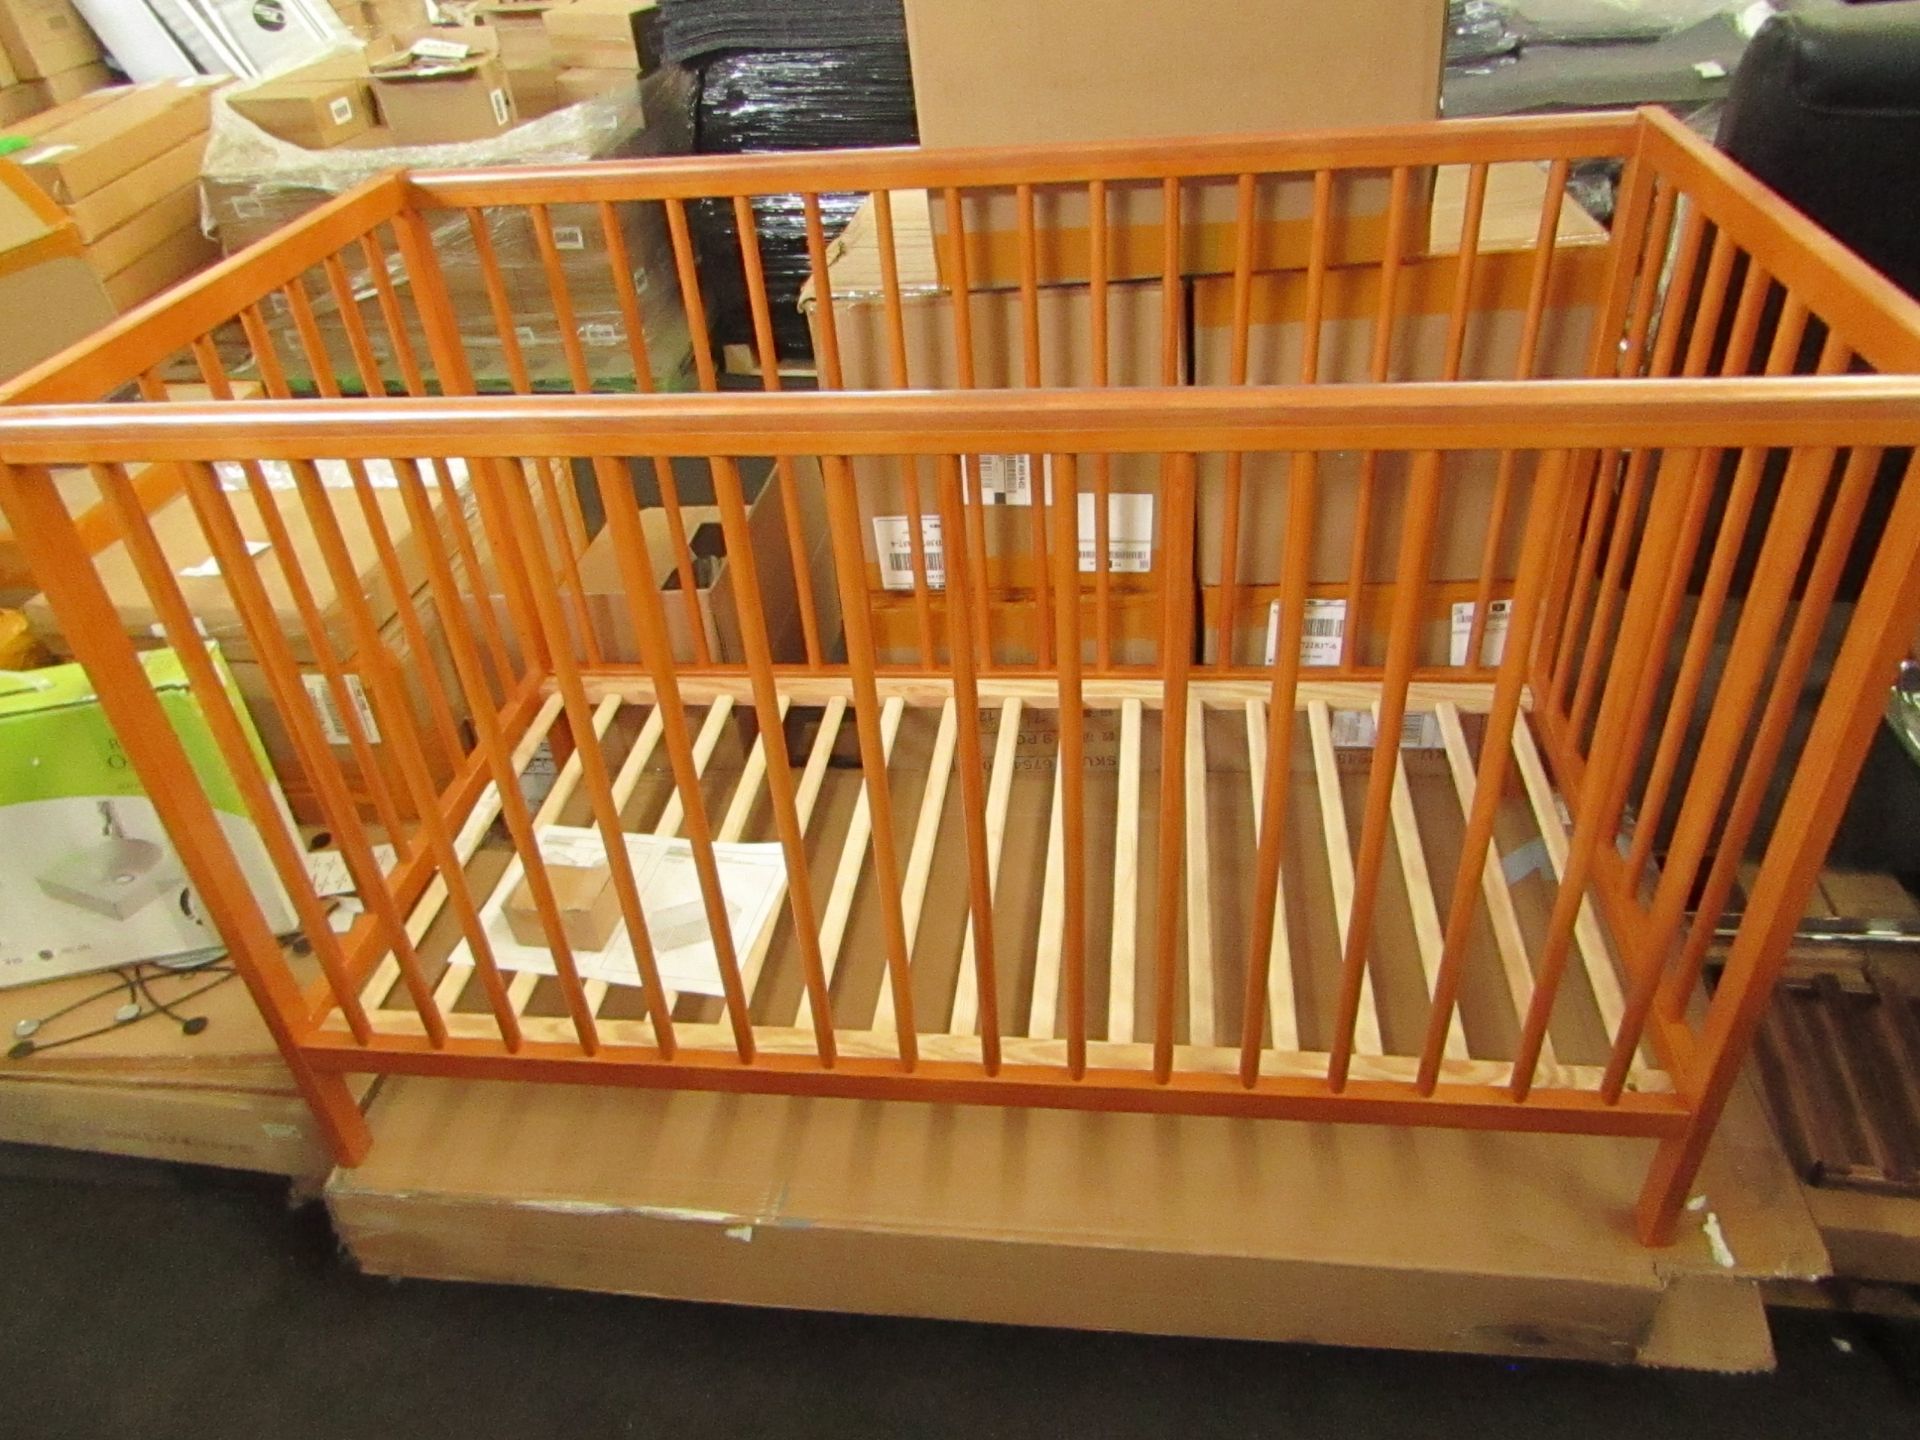 Baby Elegance - KIM Antique Pine Wooden Cot - Good Condition & Assembled & Box Present. RRP £90.